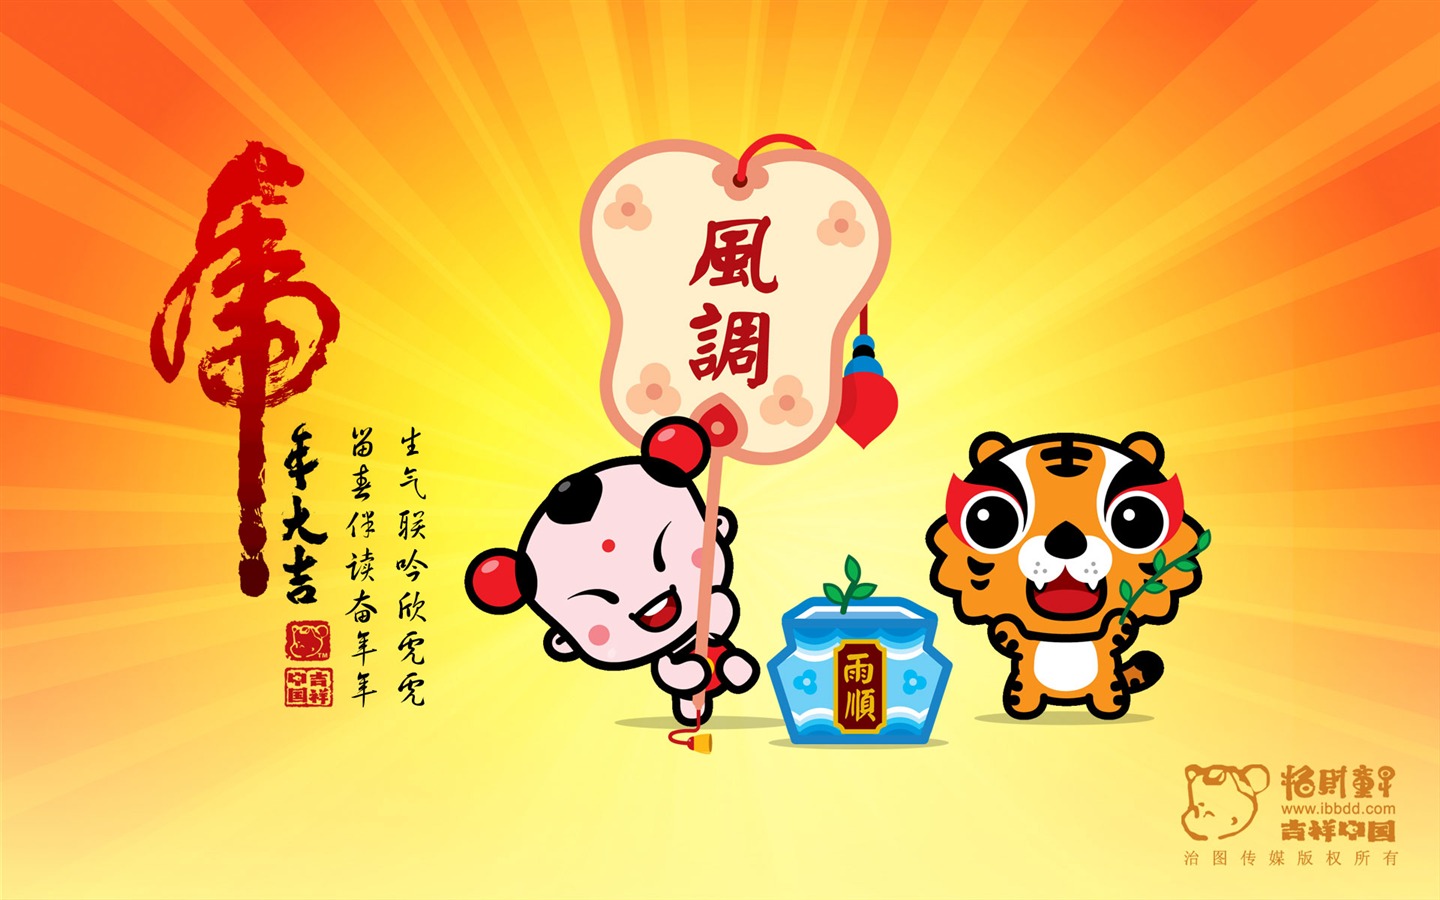 Lucky Boy Year of the Tiger Wallpaper #21 - 1440x900